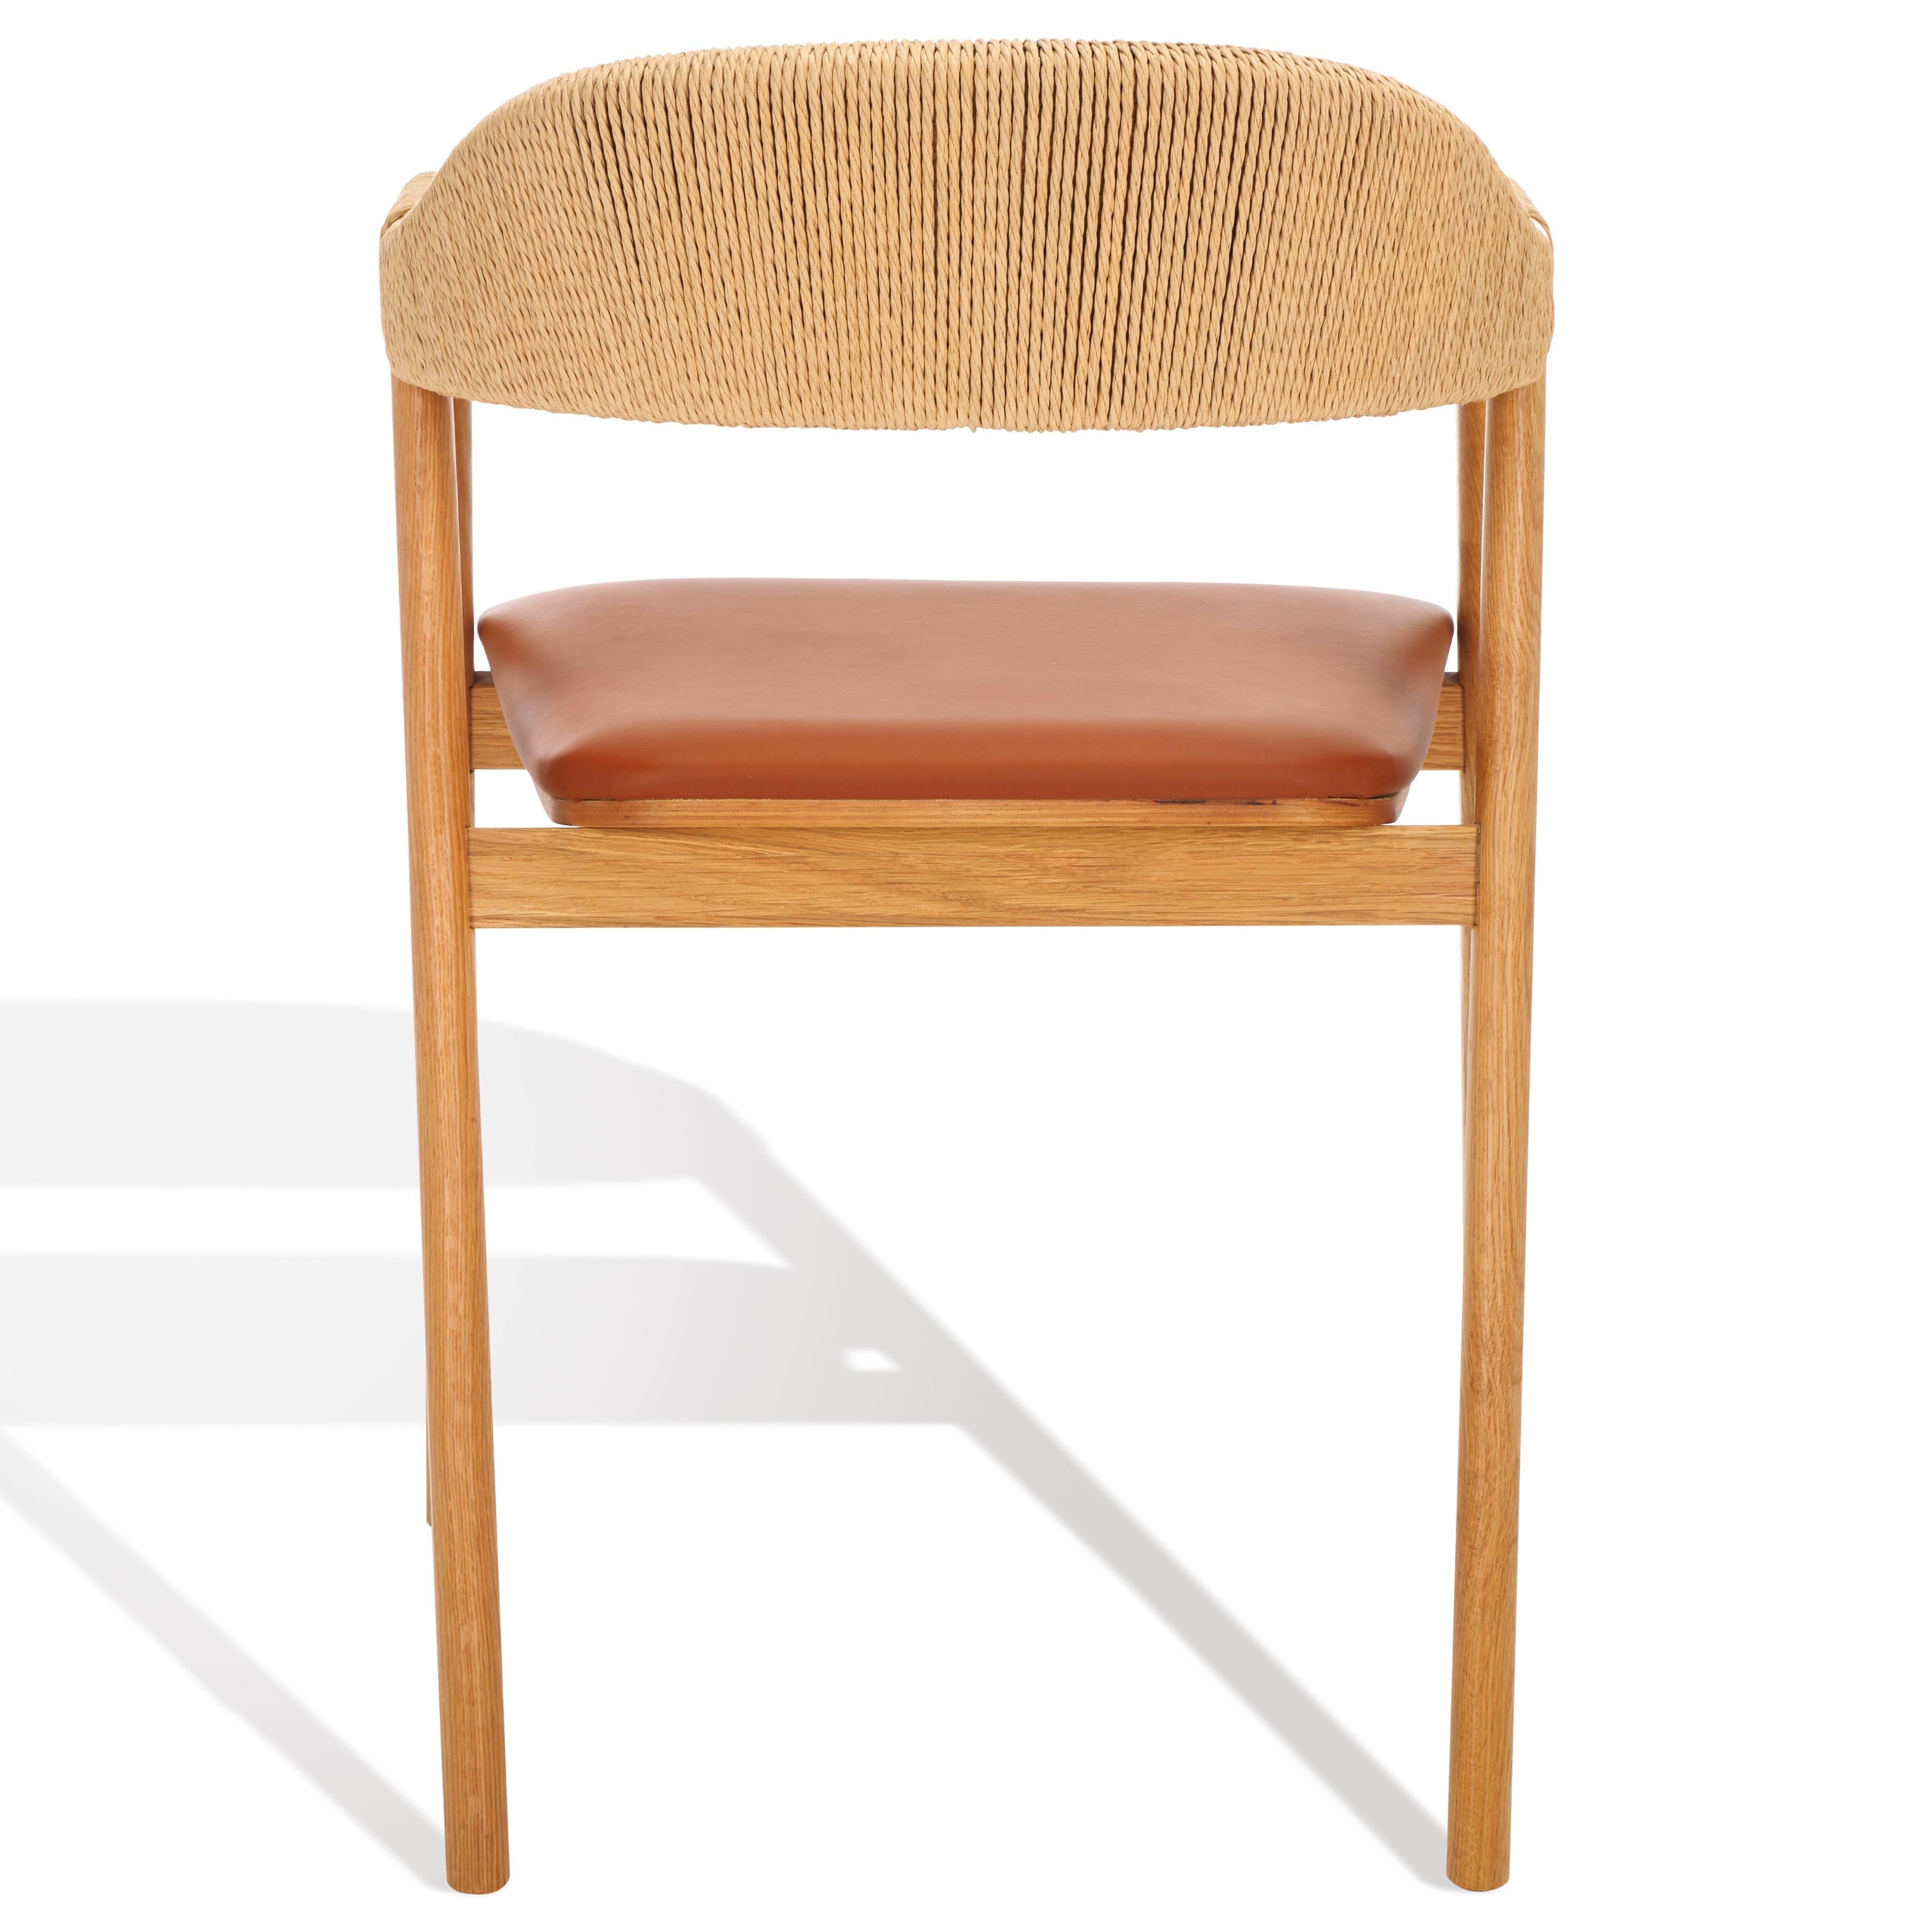 Safavieh Couture Eamon Leather And Cane Dining Chair, SFV4203 - Natural / Brown